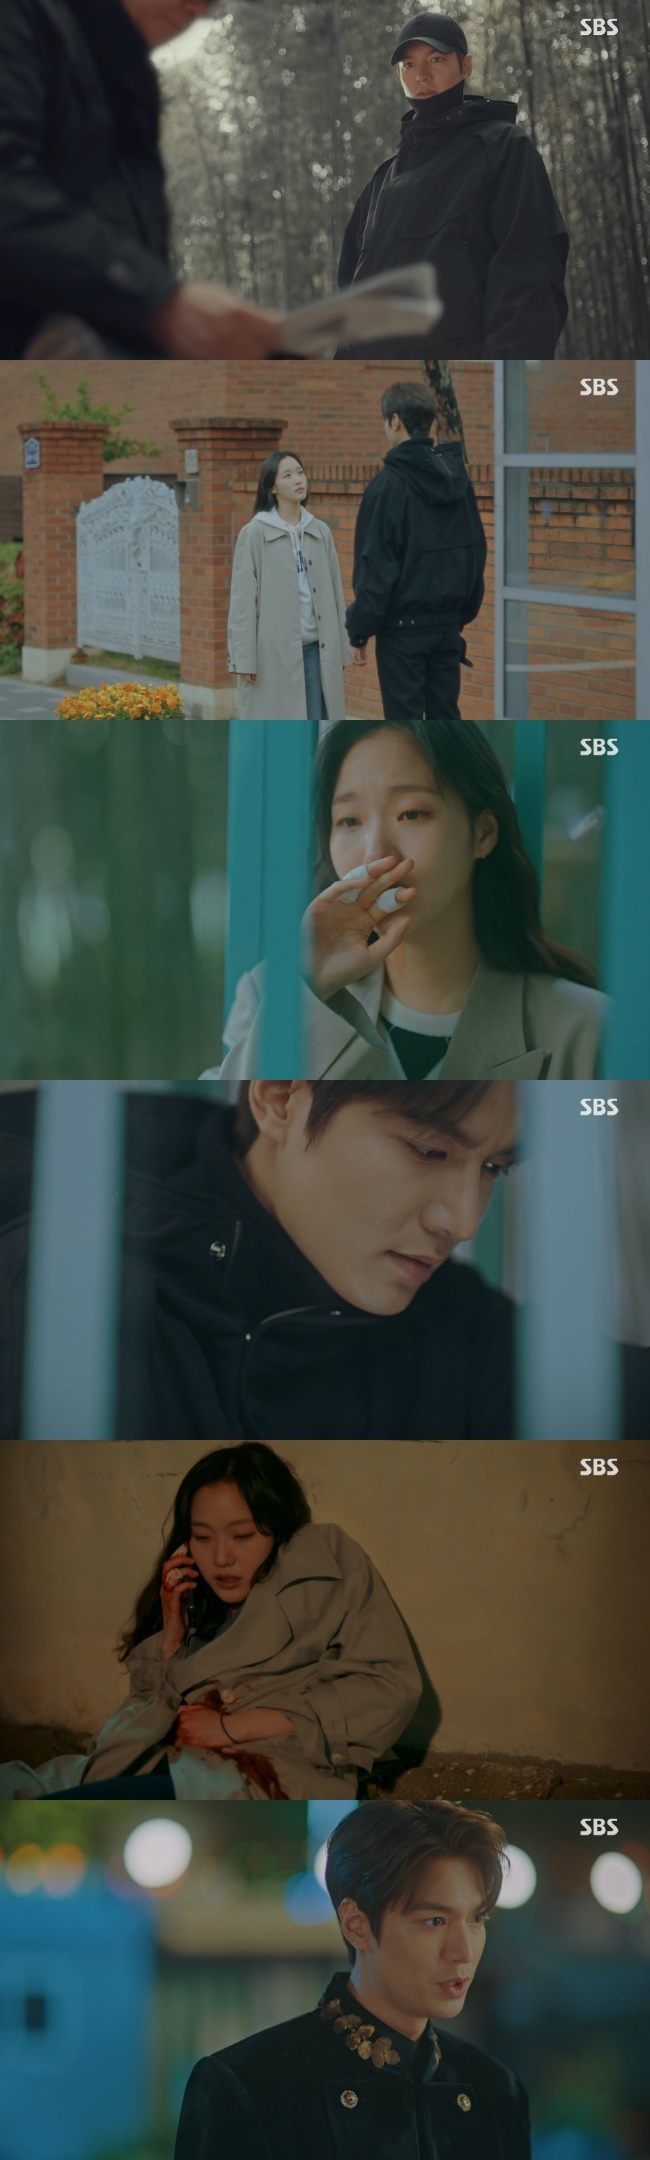 Lee Min-ho, who returned to the past and saved himself, made a time trip inside the door of the dimension to meet Kim Go-eun.Lee Min-ho returned to the moment of the night of the reverse mocking in the 14th episode of SBSs Golden Land Drama The King: The Monarch of Eternity (playplayed by Kim Eun-sook/directed by Baek Sang-hoon and Jung Ji-hyun) broadcast on June 5.Luna (Kim Go-eun), who was drugged for alcohol, tried to find a whip hidden in the ink half-sow when Igon fell unconscious, but suddenly he ran away as Cho Young (Woo Do-hwan) entered the hotel.Lee saved his life with the help of his acquaintance Kim Go-eun, and informed Cho that he had saved himself in the past and asked him to greet him on behalf of himself leaving.Lee and Lee (Lee Jung-jin), who learned that the saving of the young Igon was the future Igon, crossed the door of the dimension at the same time.The momentary unity of the food made the axis of time and space at the same time, and the two moved to the day of the past reverse night.In 2020, Irim told Irim that he was I am you, you from 2020. He ordered him to kill the prince immediately and have a complete expression.The past, which has finally come to believe in the legend of the ceremony, says, You have failed. You are still foolish at age.I will have a complete food, he said, wielding a knife at Irim in 2020.Igon had saved himself from the past by shooting with his men, and Igon, who had been tracking the runaway Irim, crossed the door to return to the present, but the time remained.Igon found that only when the food is fully one, it can be moved in time and that it takes four months in the door of the girl-level by 2020.Igon met a five-year-old Jung-tae, who introduced him to a young man as I am from another time over there and said, Ill be right there, Im going to you.Lee then visited Jung Tae-eul in April 2016.Jung Tae-eul Memory Lee, who met at the age of 5, and Lee was heartbroken to see Jung Tae who only Memory himself as a person who saw him at the age of 5.We live at a different time now, so dont be tired until I arrive, said Igon, later asking him to give himself a little more time when he meets again at Gwanghwamun.Jung Tae-eun, who learned that Lee was in the past, missed him on a public phone in front of a bamboo forest with a dimension door.At that moment, Memory was added in 2016, and in the pay phone, Please wait a little longer on April 13, 2016.Im almost there. When a note appeared, I cried.Jung Tae-eul met Luna, who pretended to be himself and stayed around his father and Ming Nari (Kim Yong-ji).Luna said, I warned you, but if we meet you, you die. Then she stabbed him. Youre the first to lose anything.I lost something every day in my life. Lee Ha-na